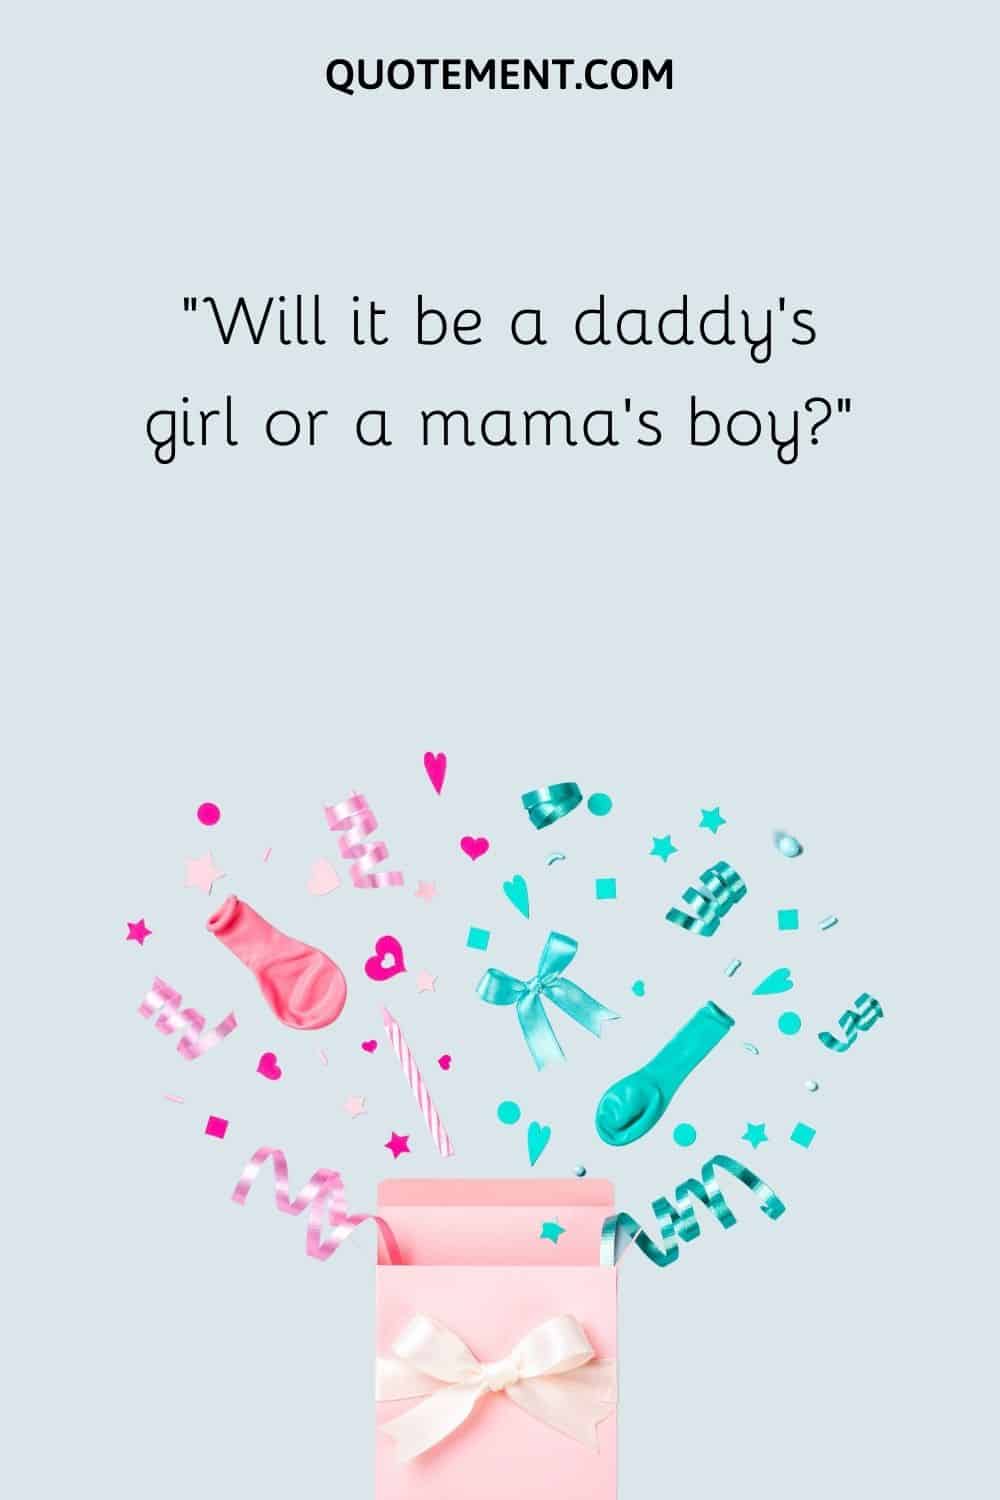 Will it be a daddy’s girl or a mama’s boy